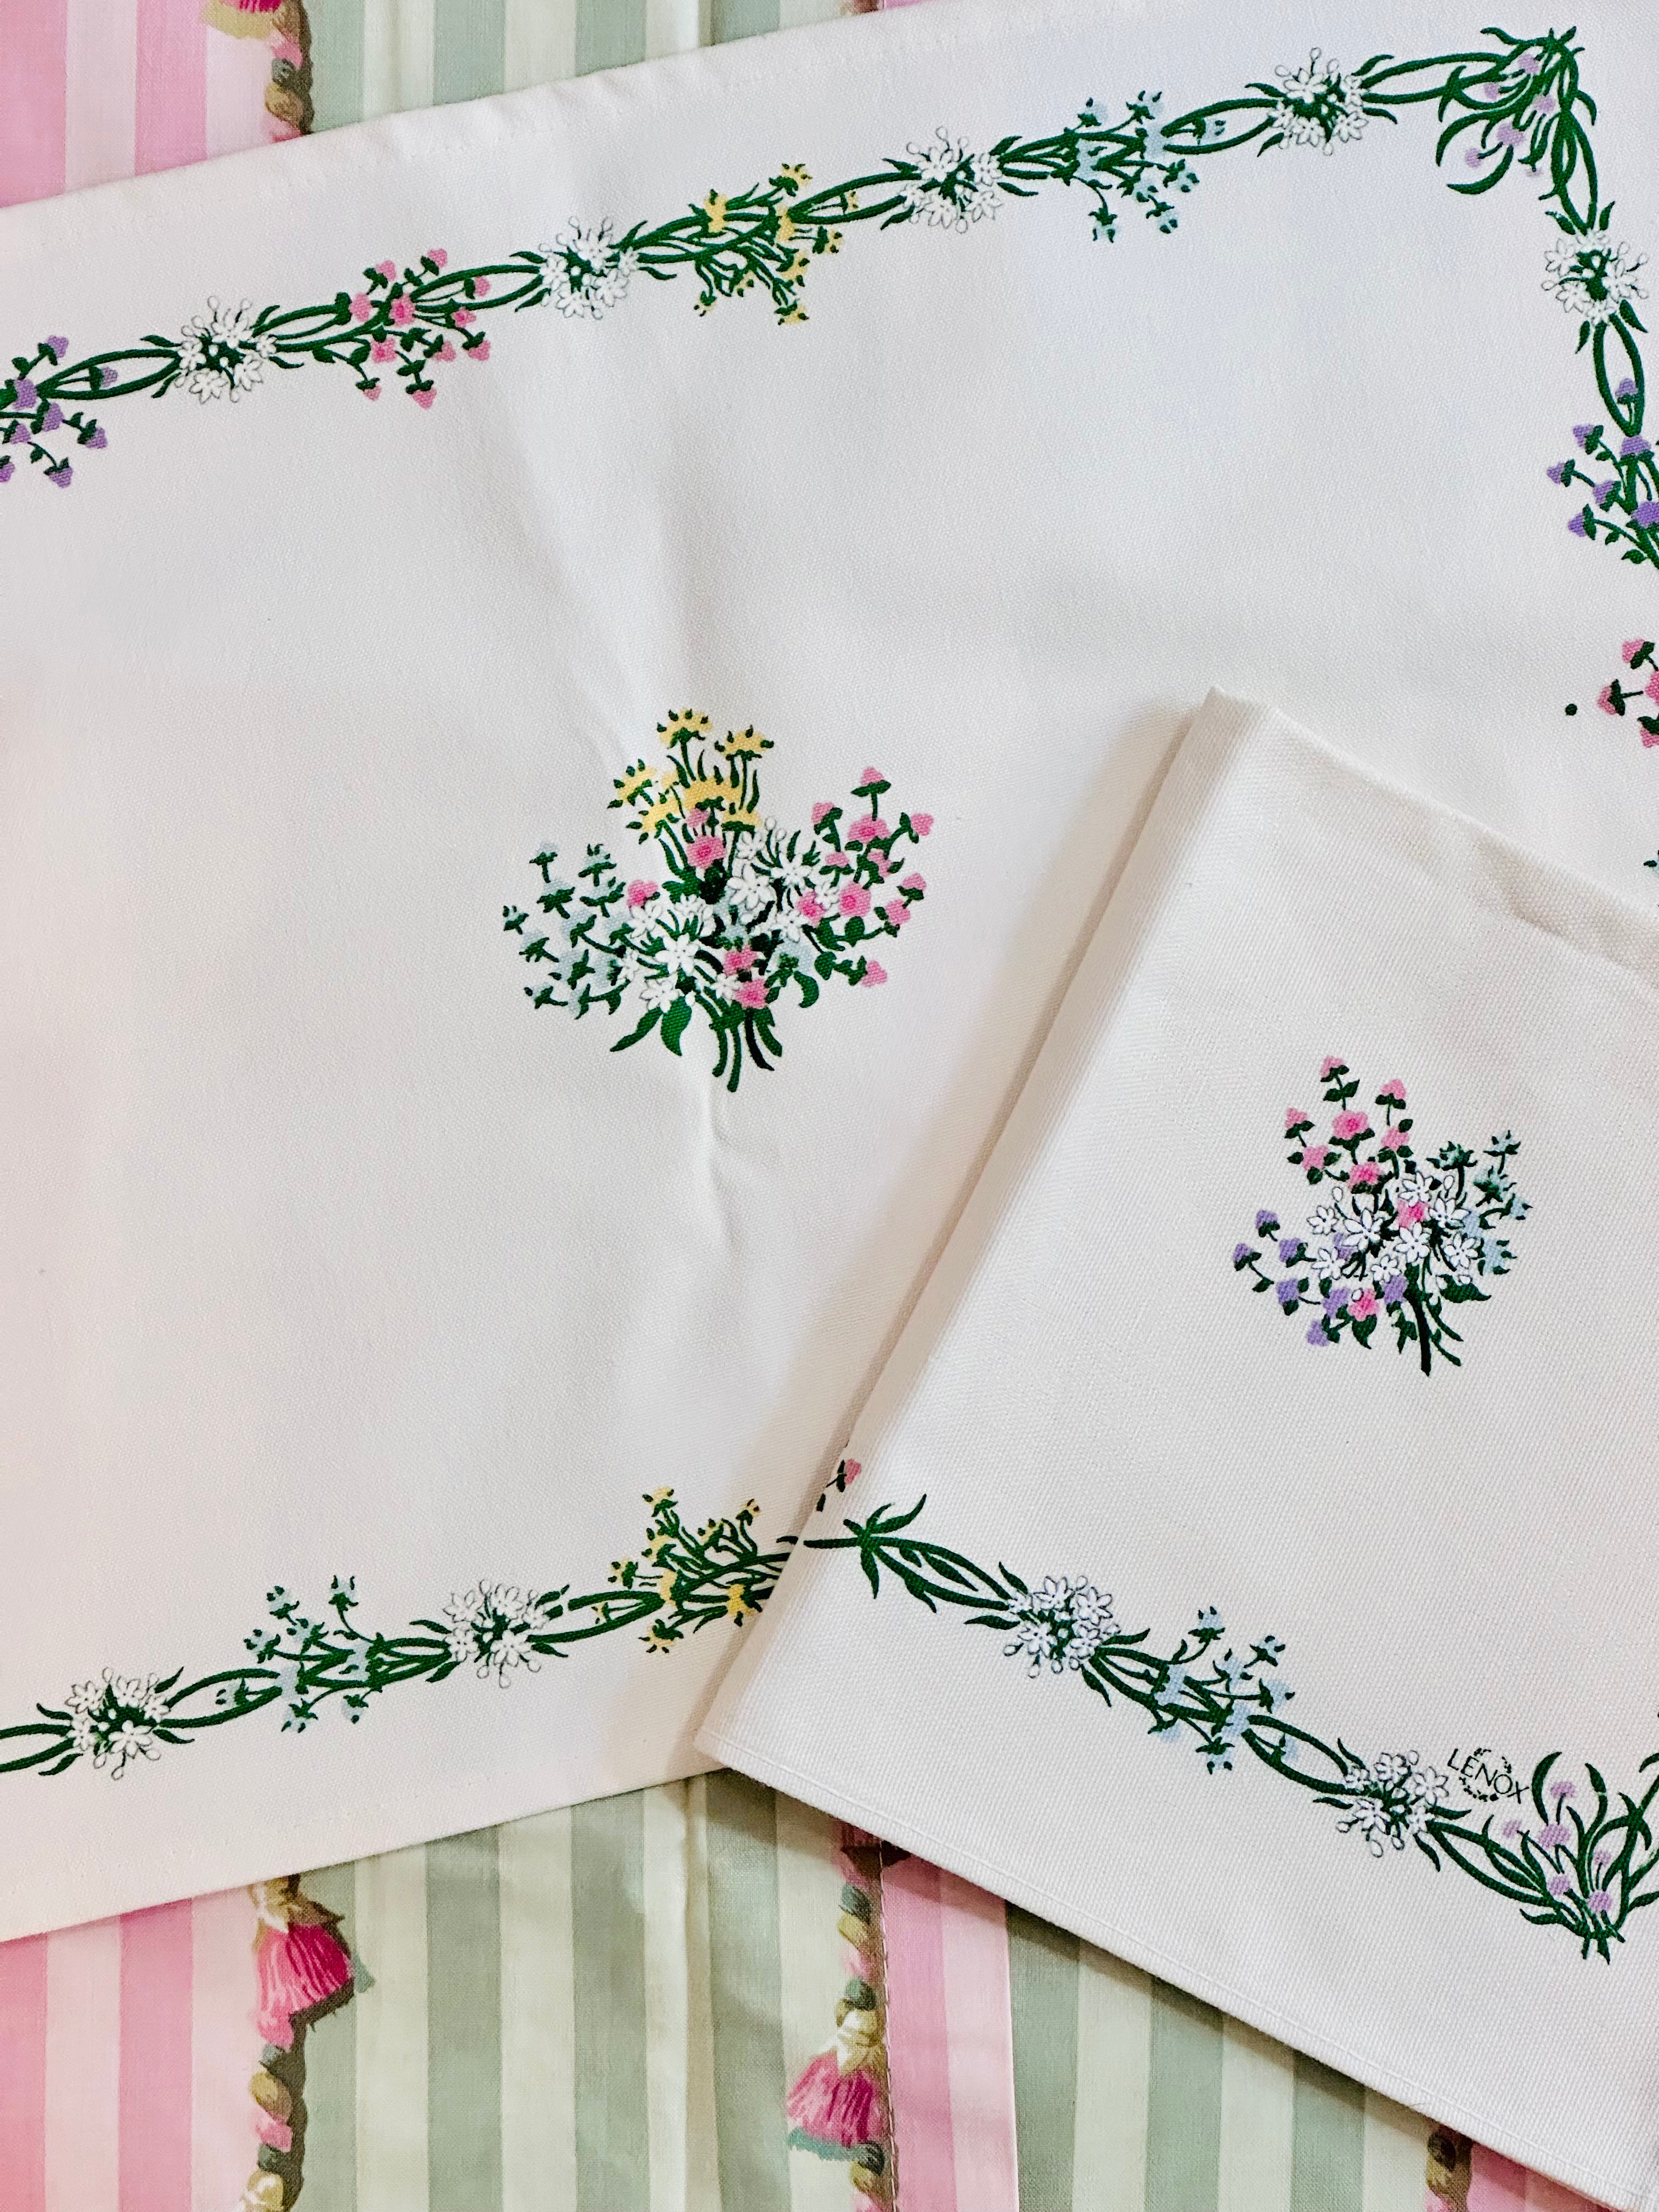 Lovely Lenox Set of Four Napkins & Placemats